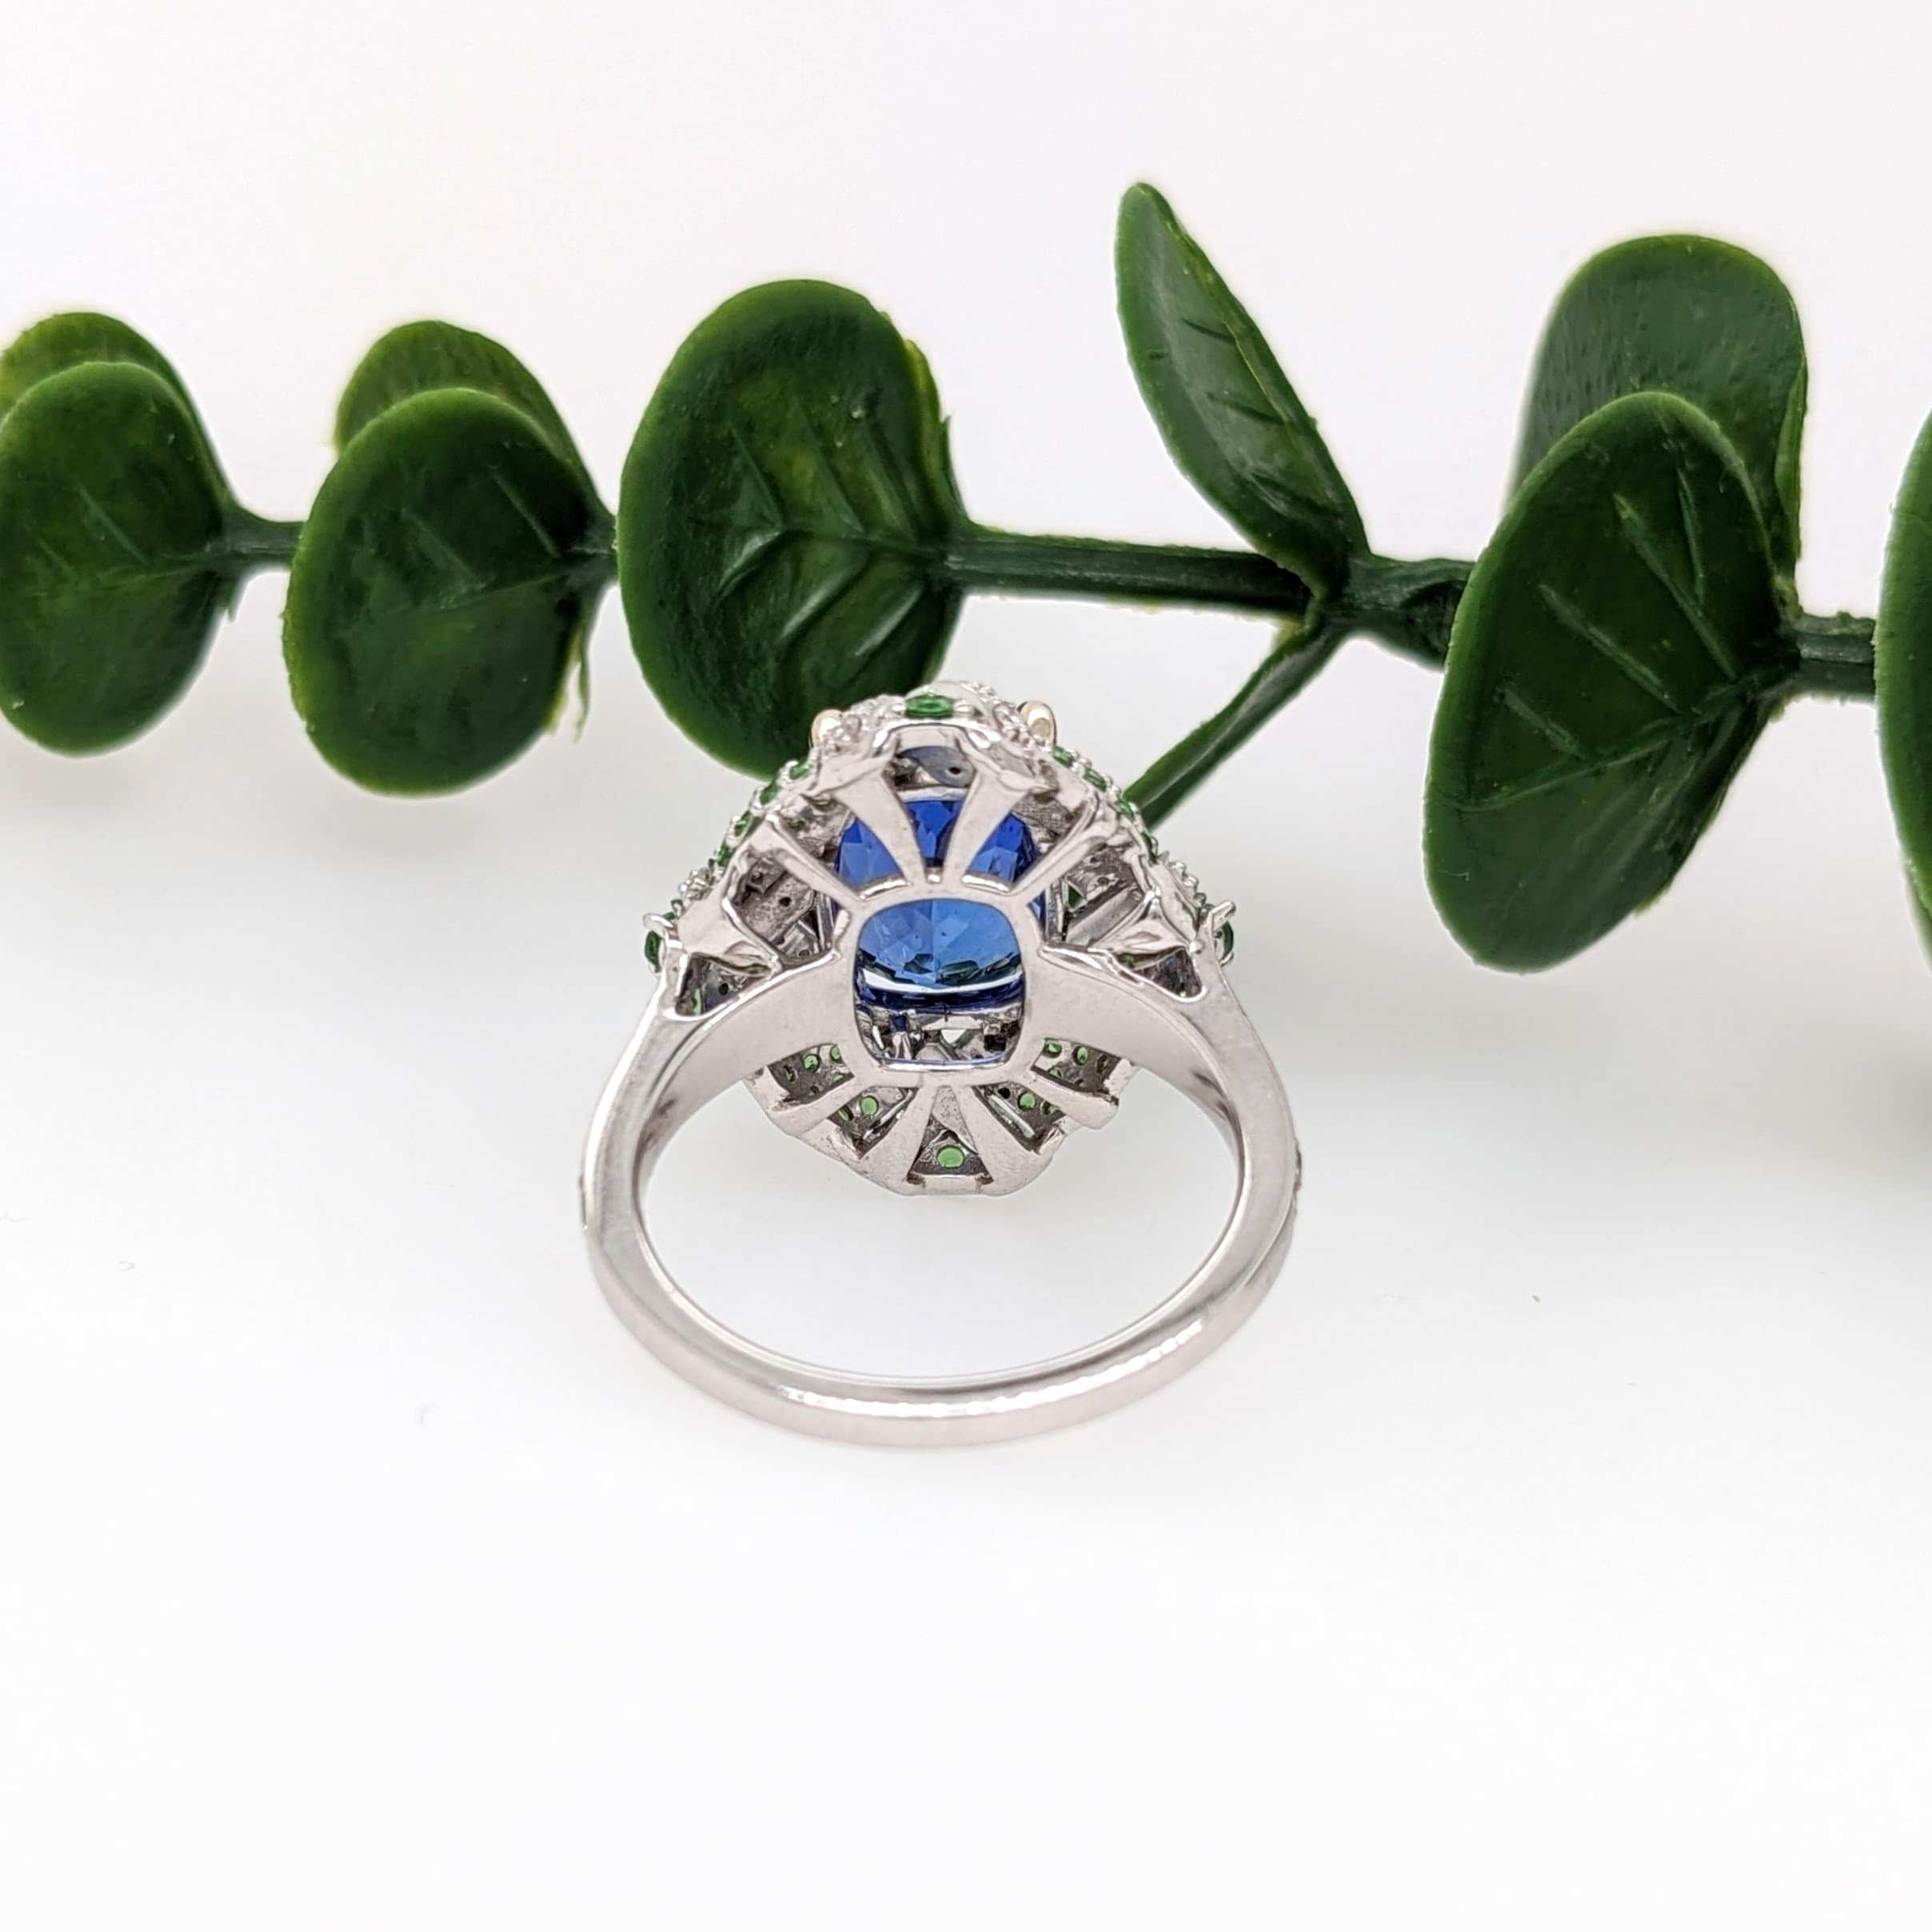 Gorgeous Tanzanite Ring w Natural Diamond and Tsavorite Accents in 14K Solid White Gold | Cushion 10x8mm | December Birthstone Ring